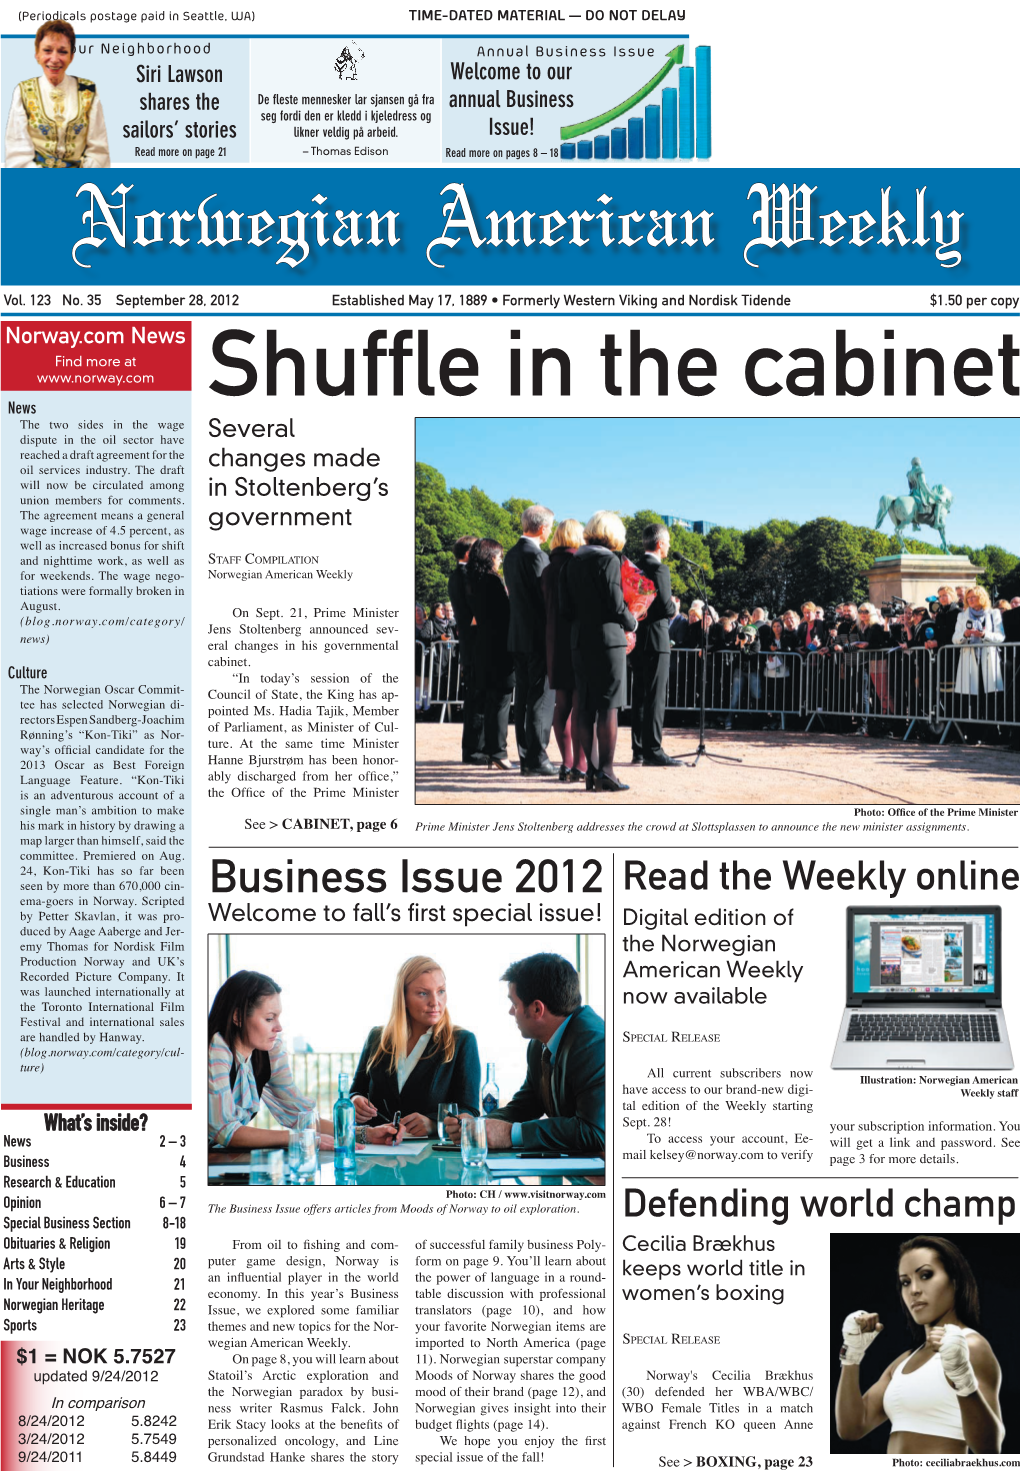 Business Issue 2012 Read the Weekly Online Ema-Goers in Norway